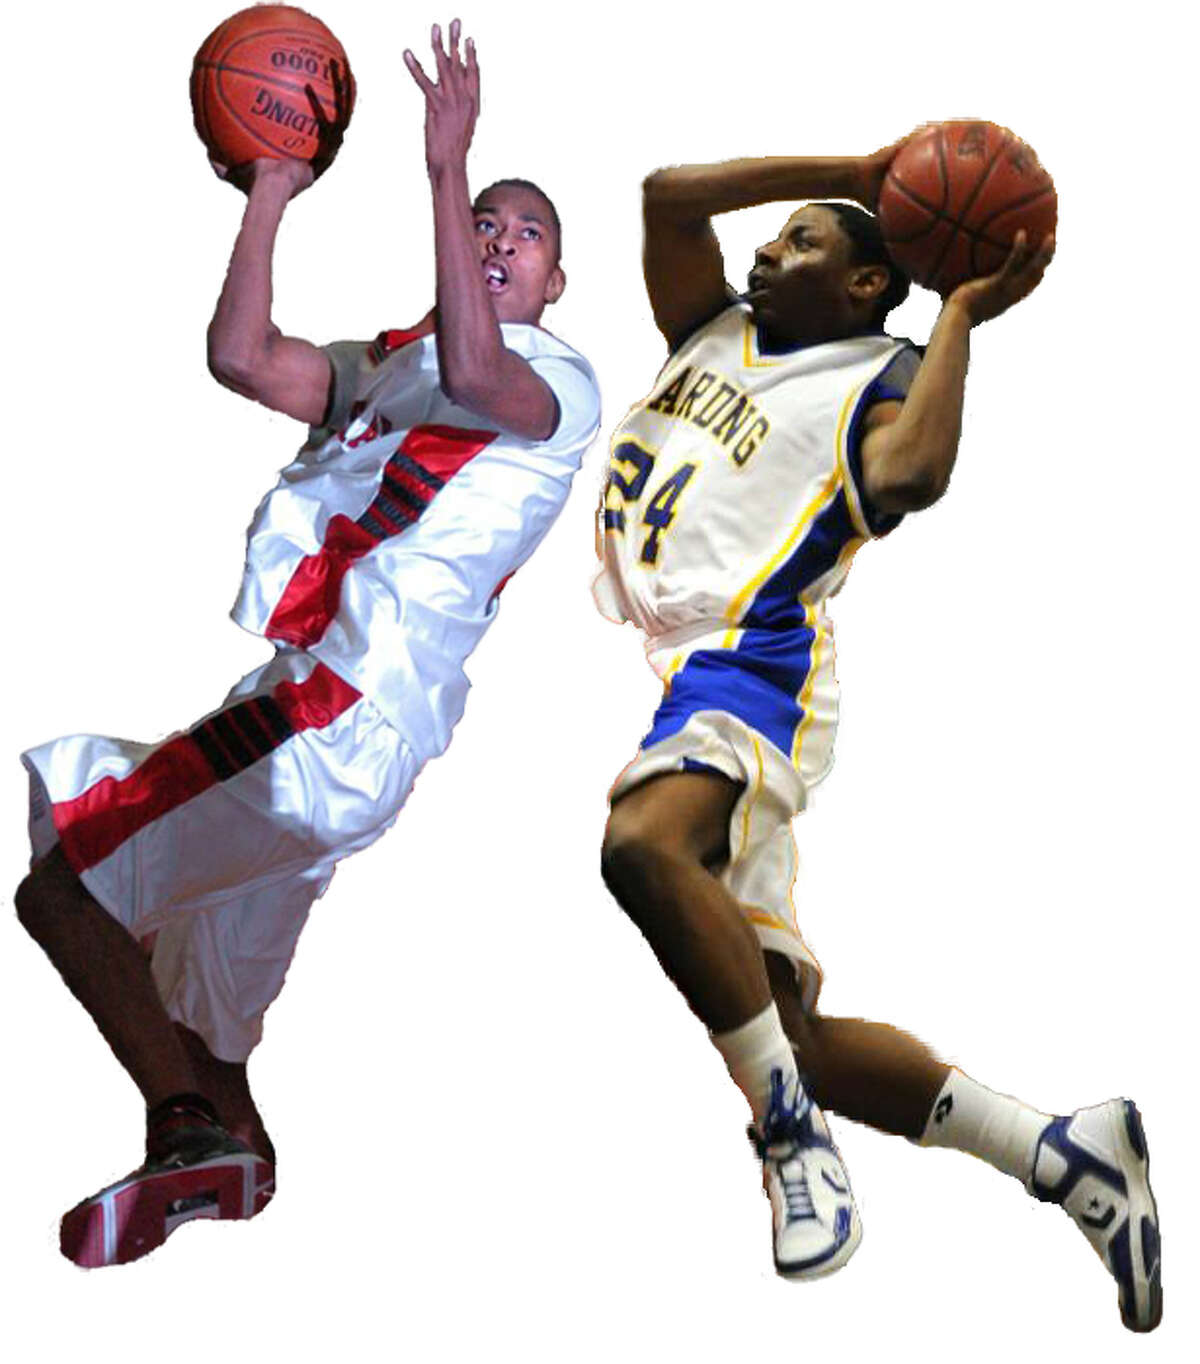 Central's Jerry Washington (left) and Harding's LaQuan Mendenhall (right) and their teams off in the Bridgeport Basketball Classic at Harbor Yard, Thursday, Feb. 4, 2010. Bassick vs. Trumbull is at 6 p.m. followed by Central vs. Harding at approximately 8 p.m.